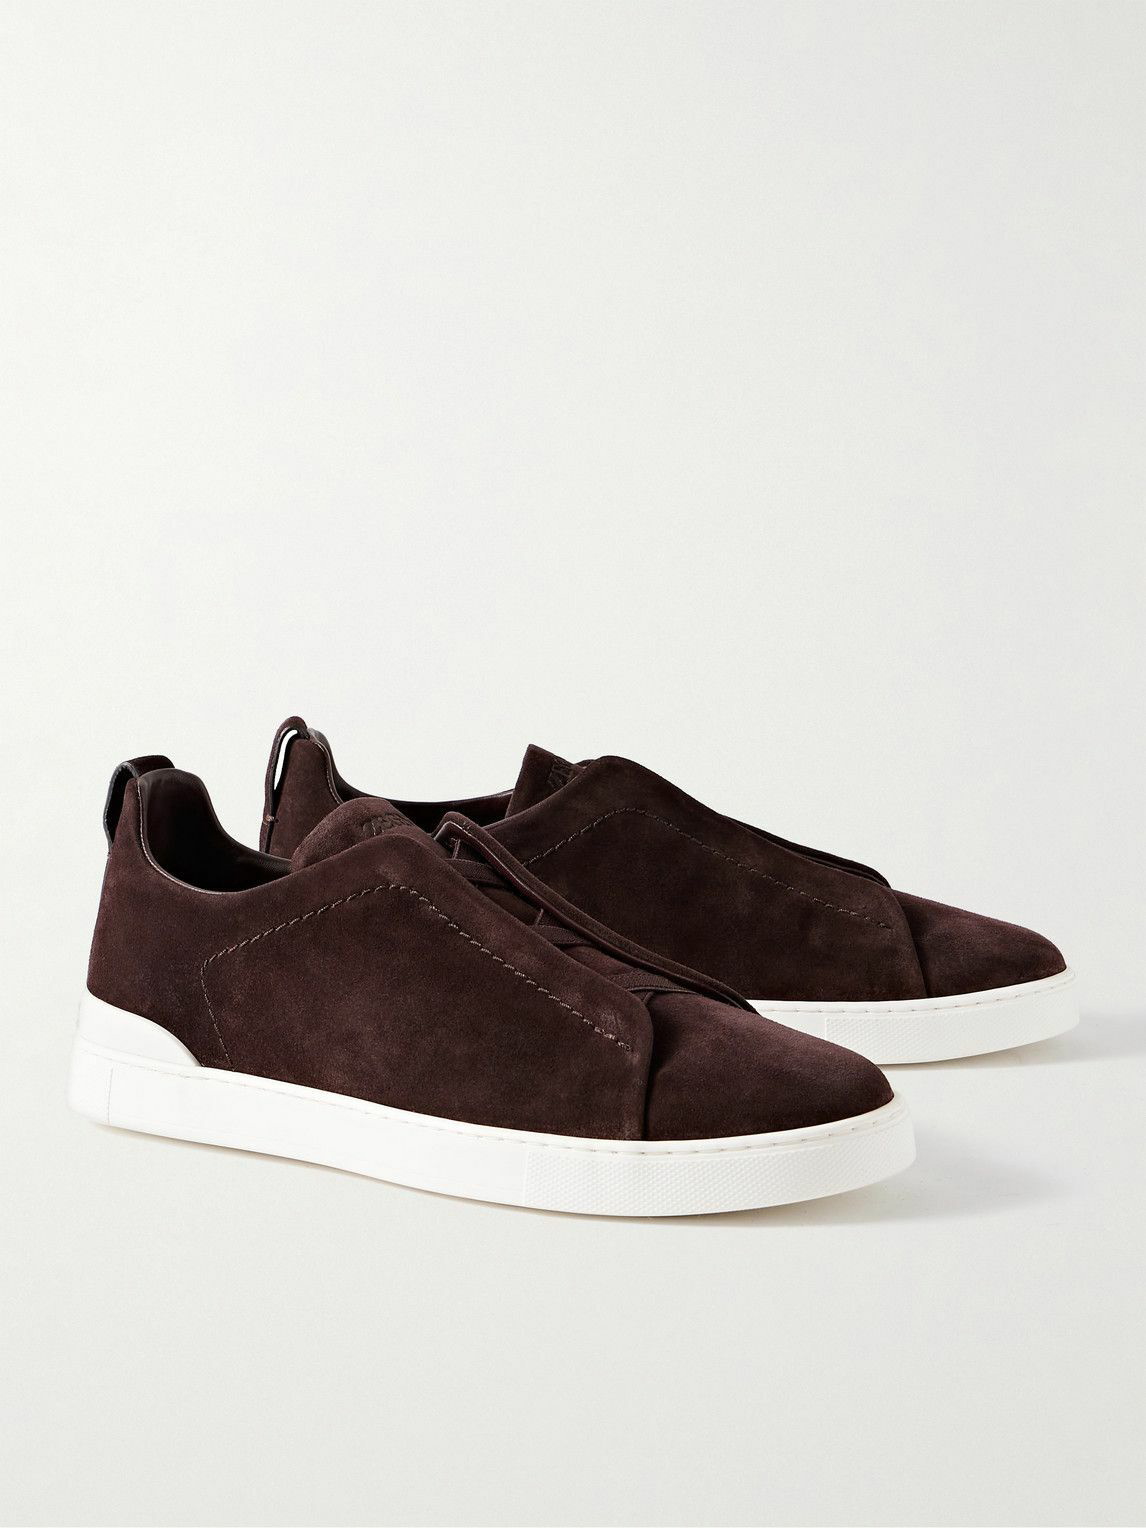 Zegna - Triple Stitch Suede Sneakers - Red Zegna